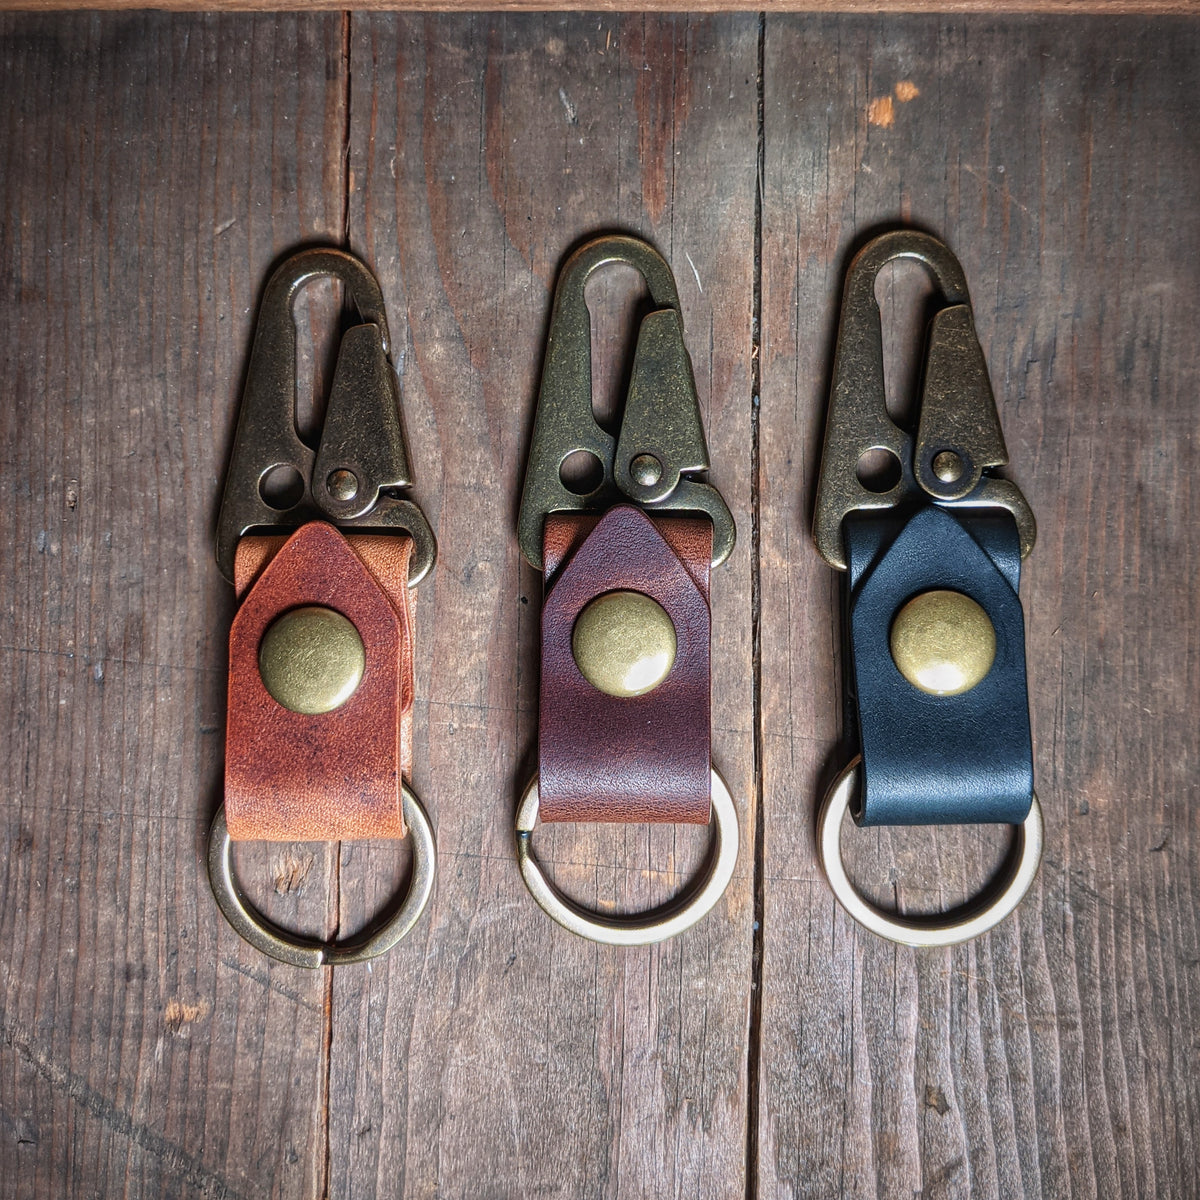 Caliber Leather Company Bear Mountain - Lever Snap Horween Leather Keychain Nickel Matte / Black